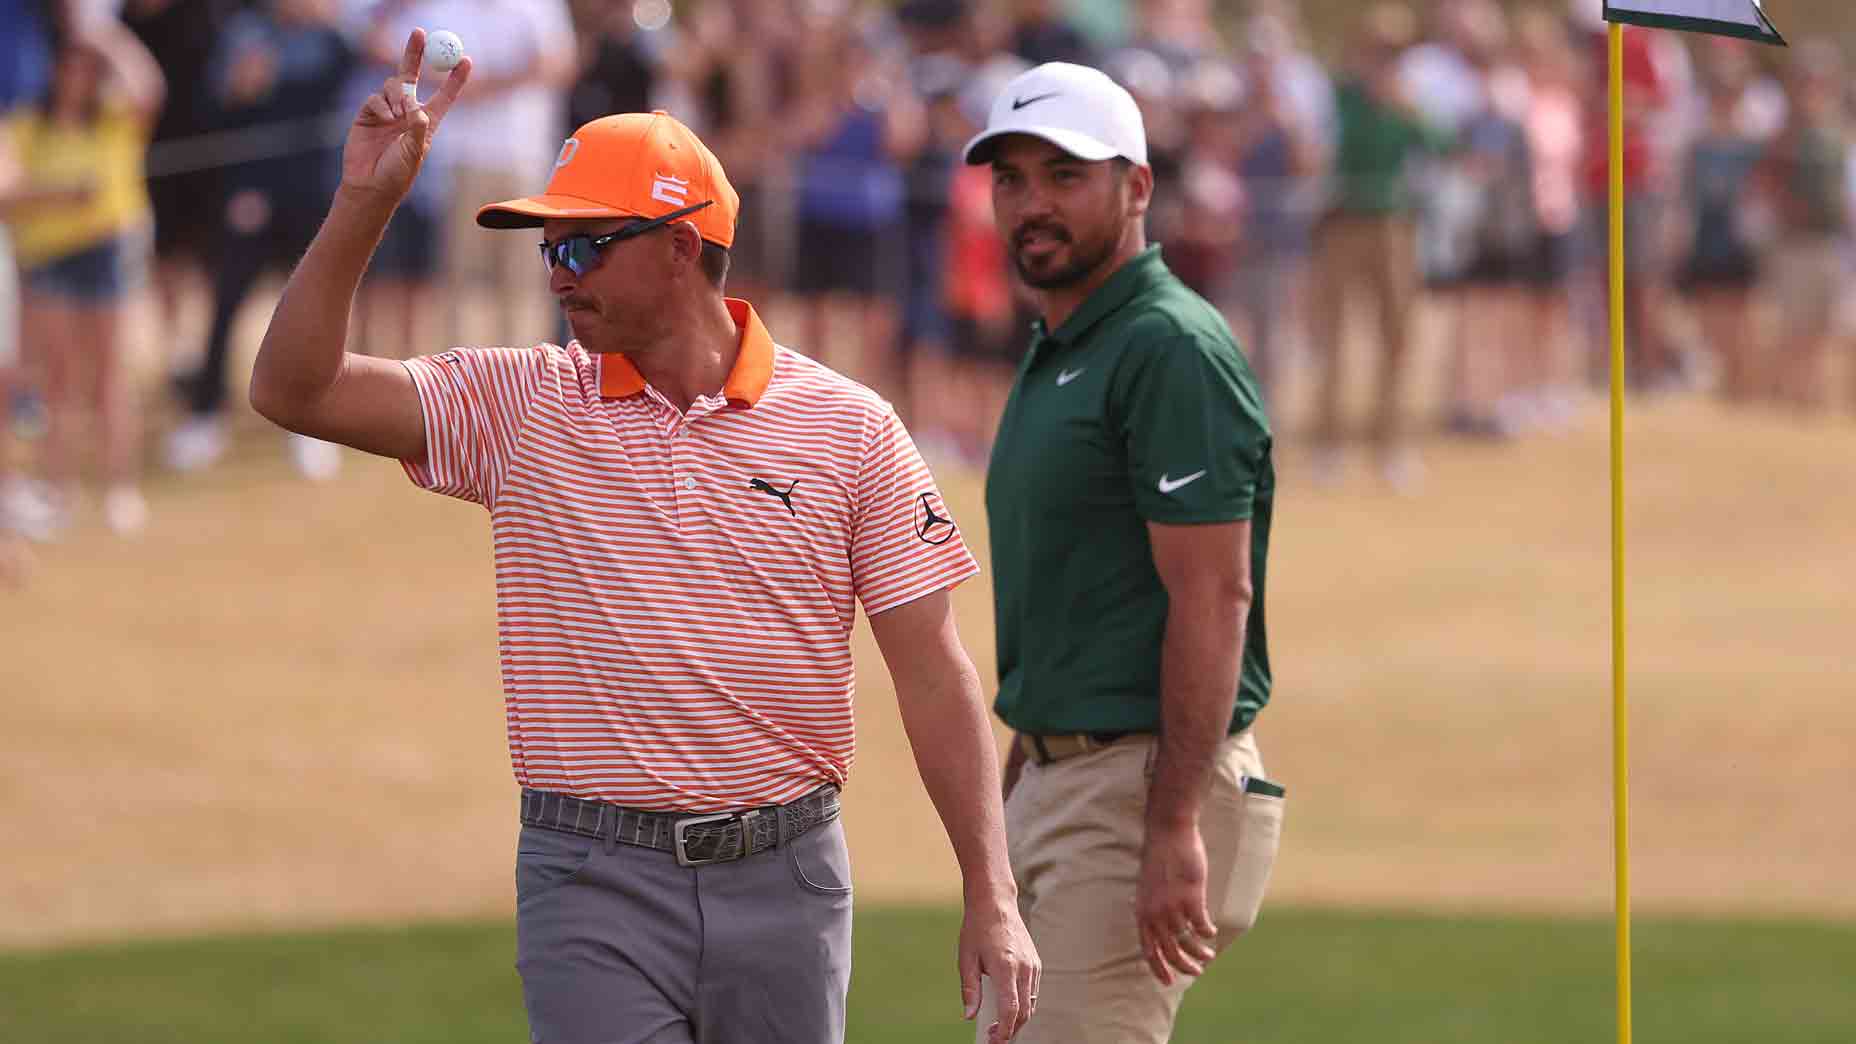 Rickie Fowler ace Watch Fowlers hole-in-one at Phoenix Open